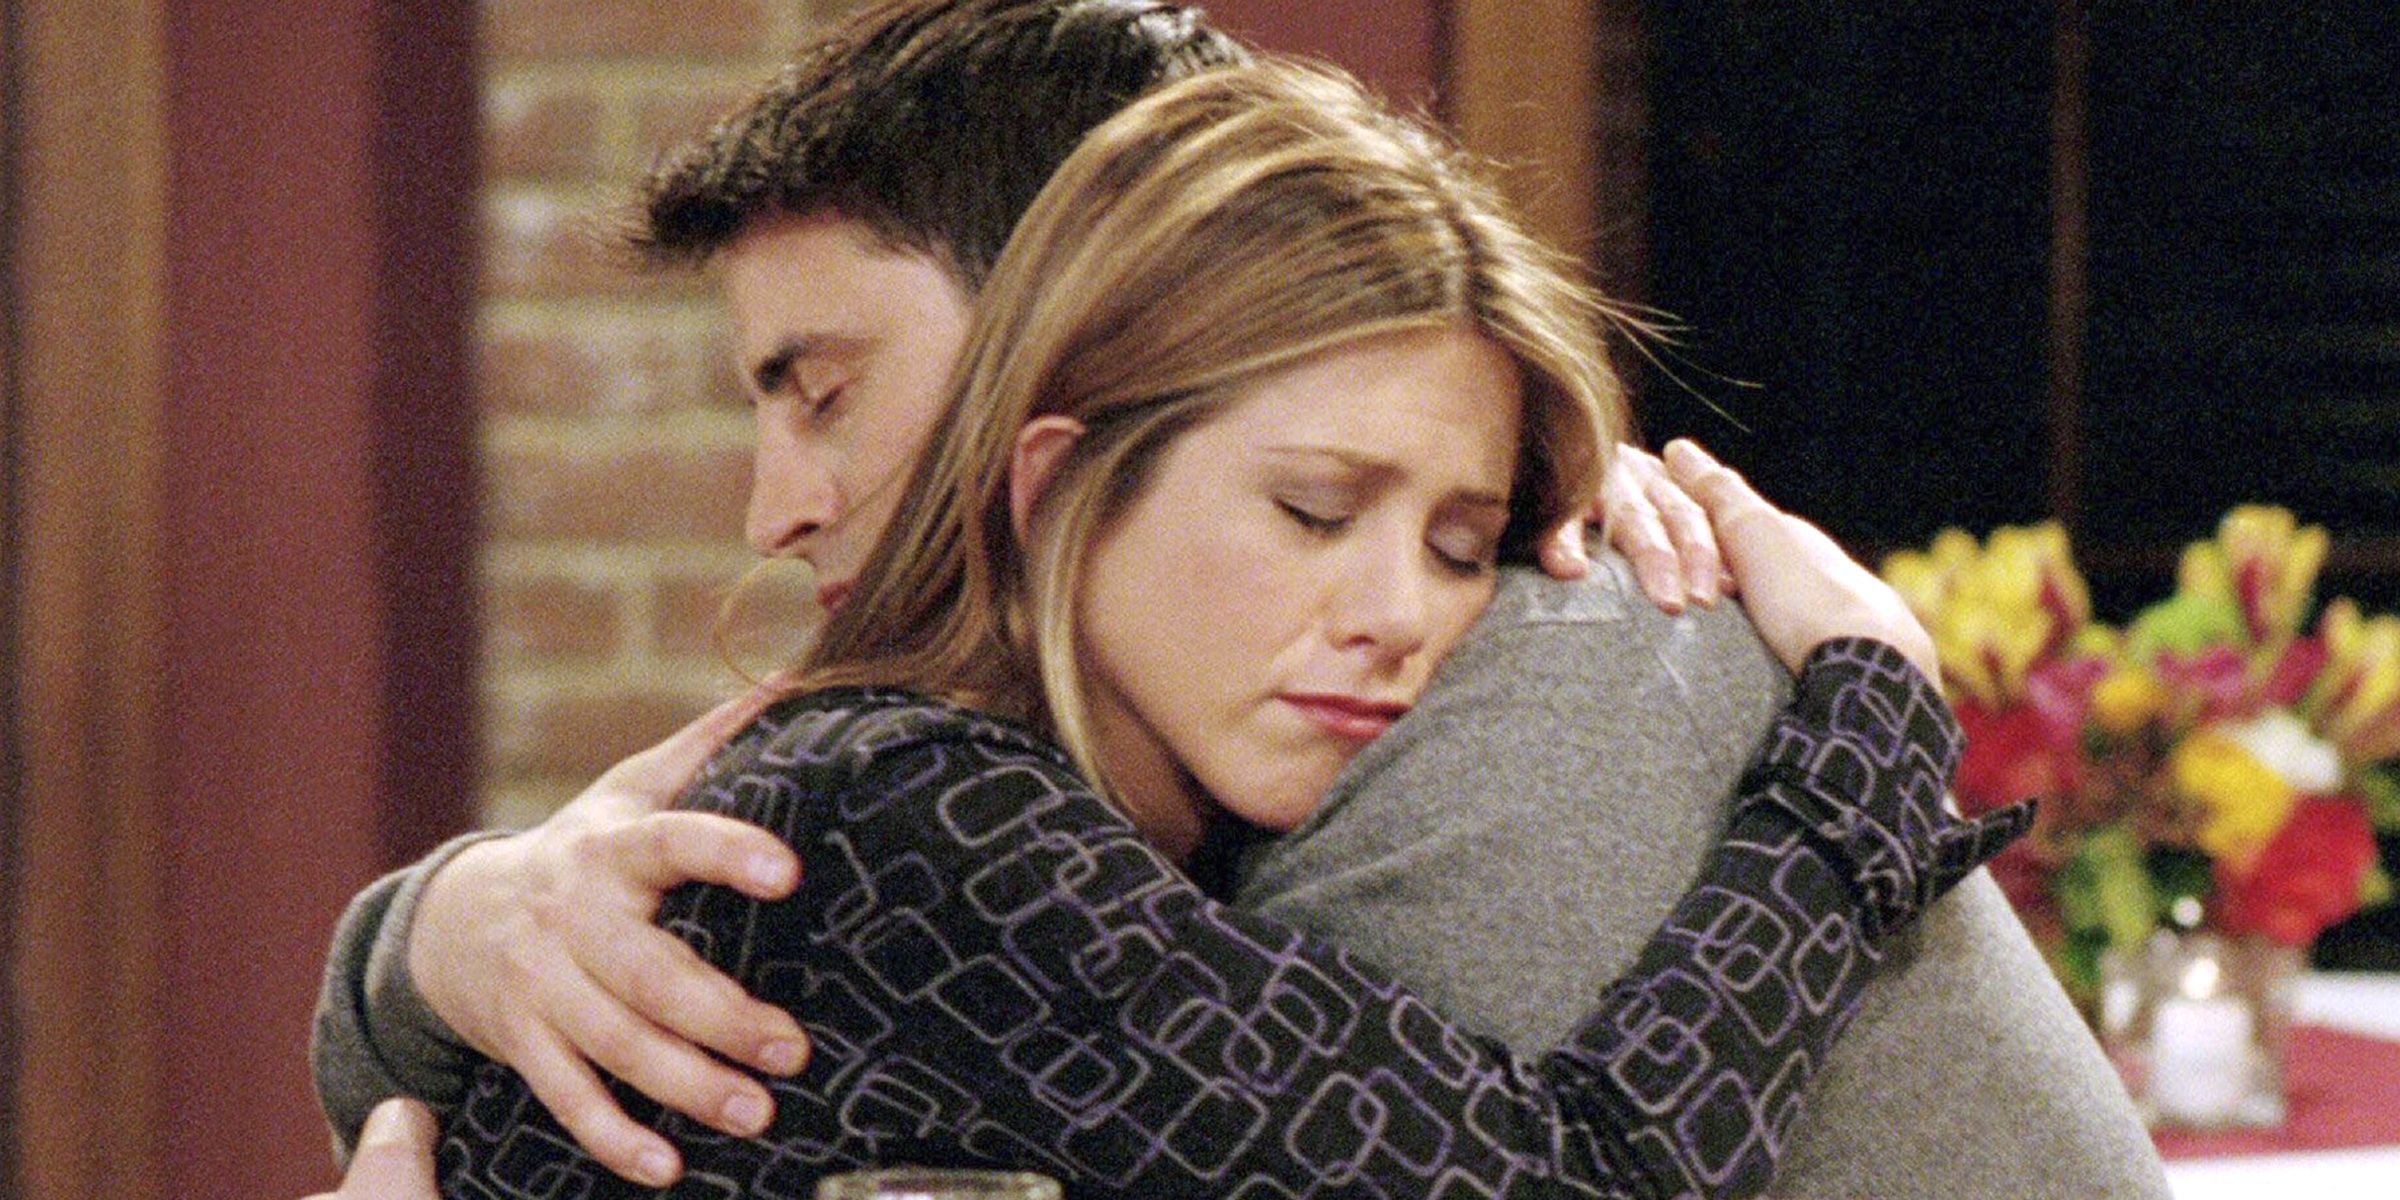 Friends 5 Times We Felt Bad For Rachel (& 5 Times We Hated Her)